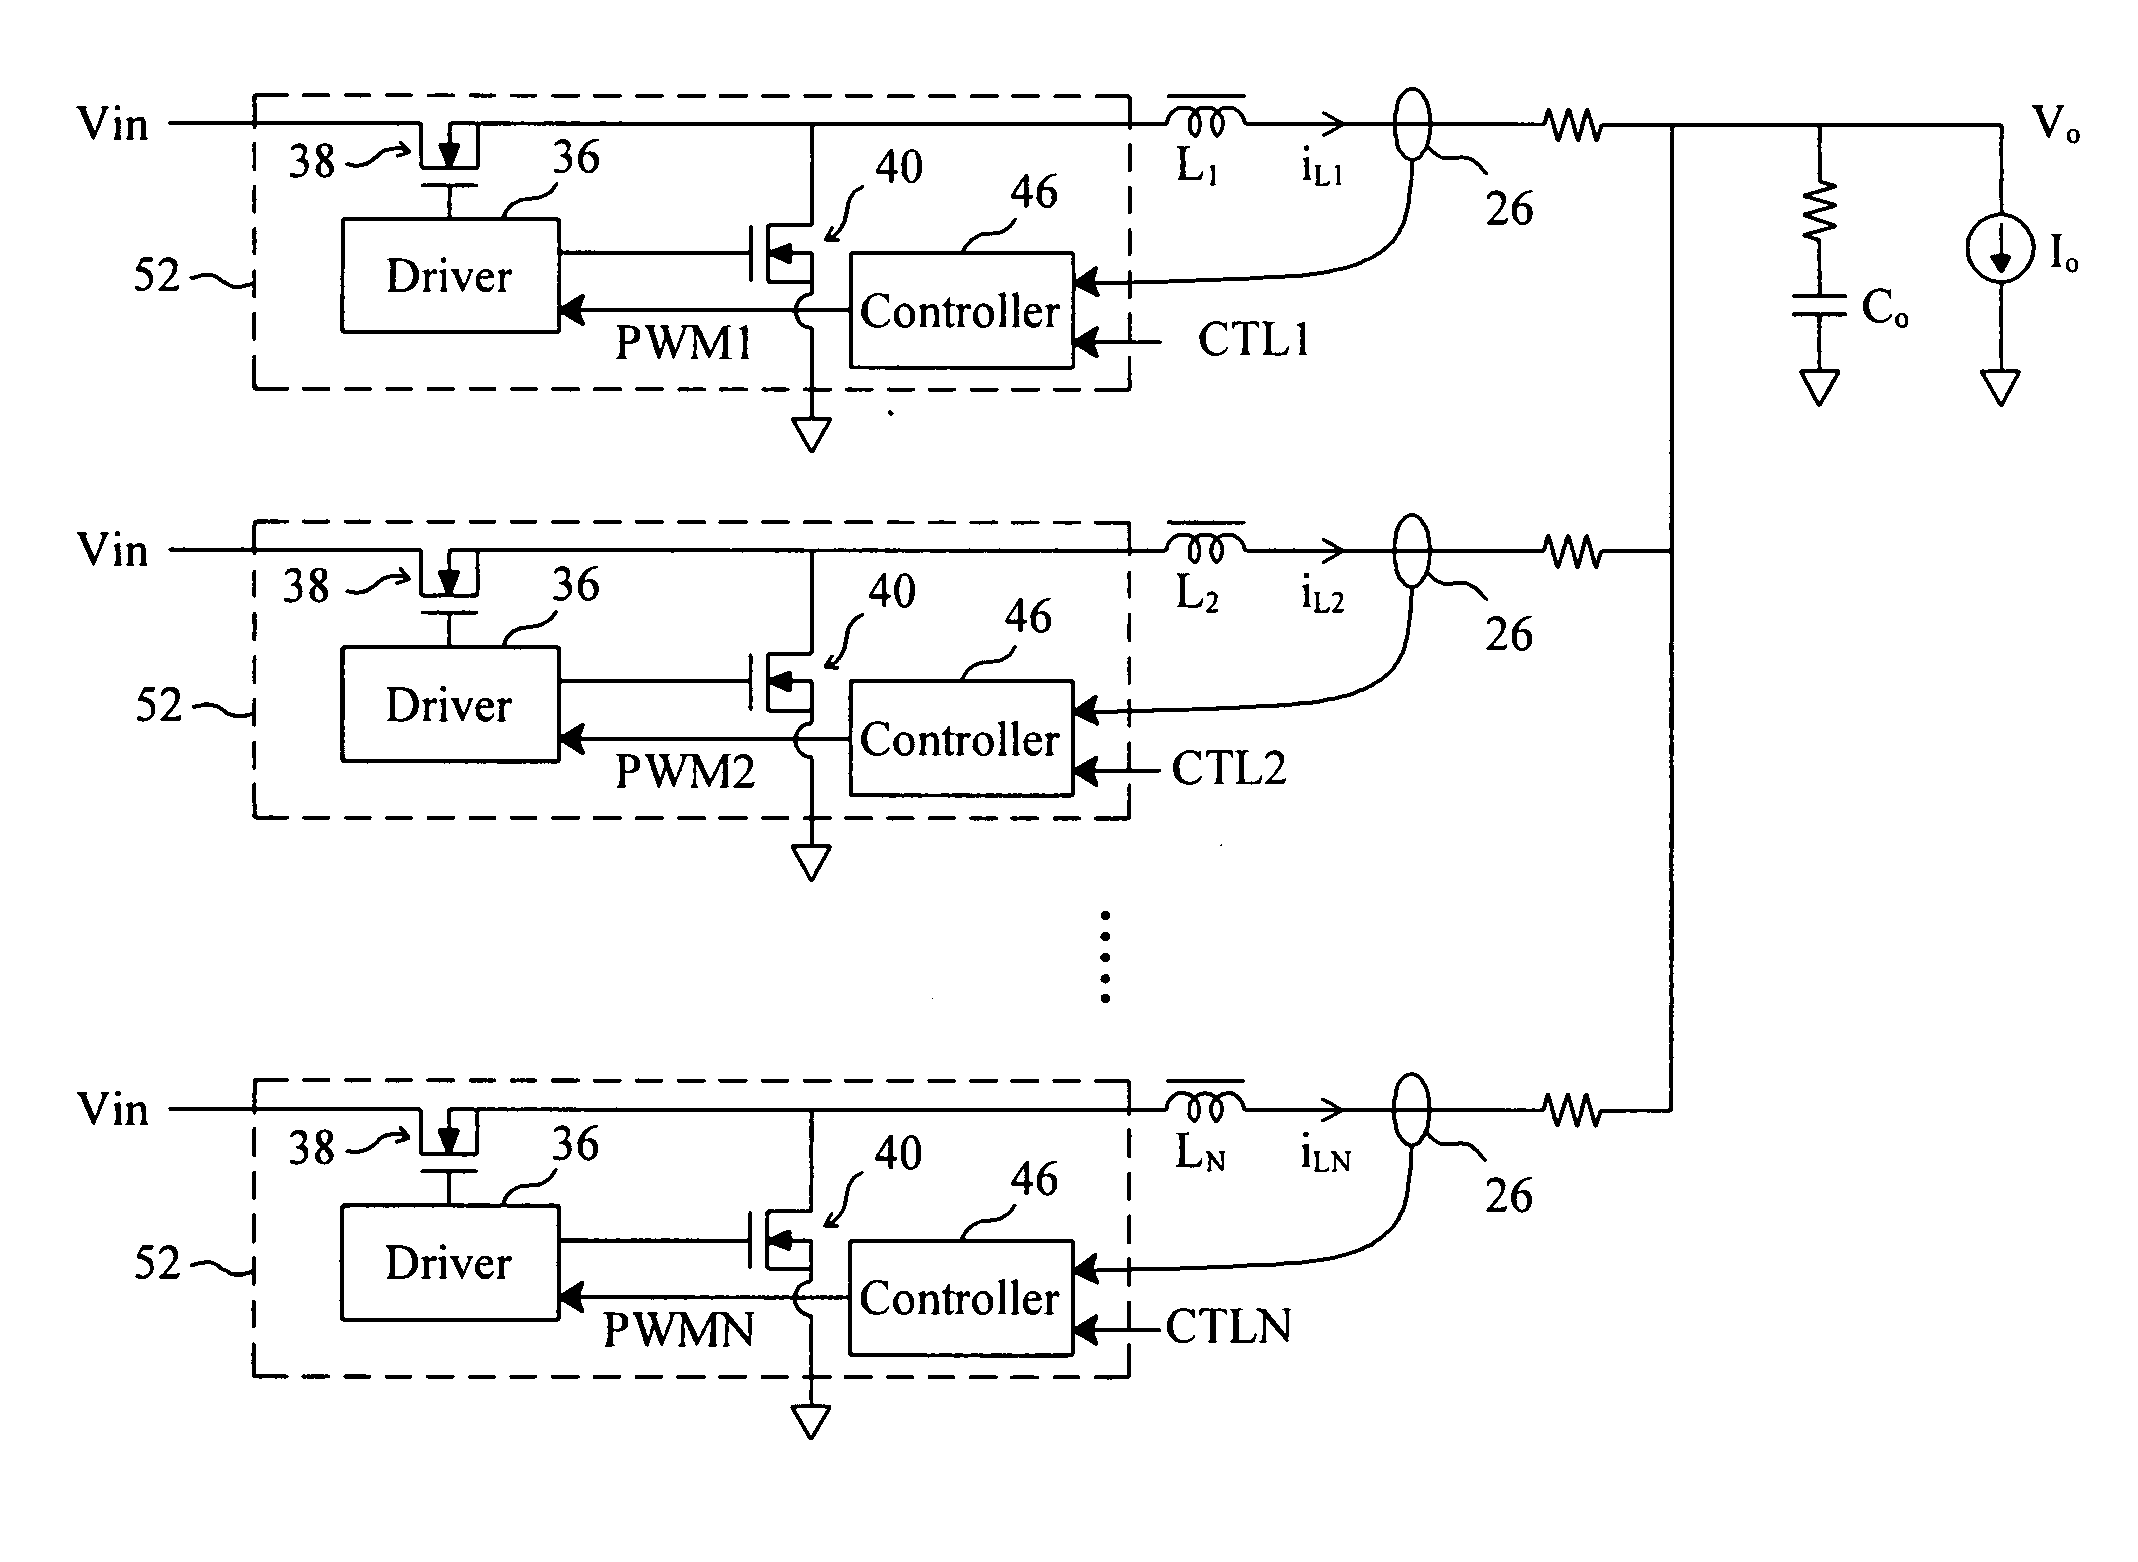 Multi-chip module for power supply circuitry